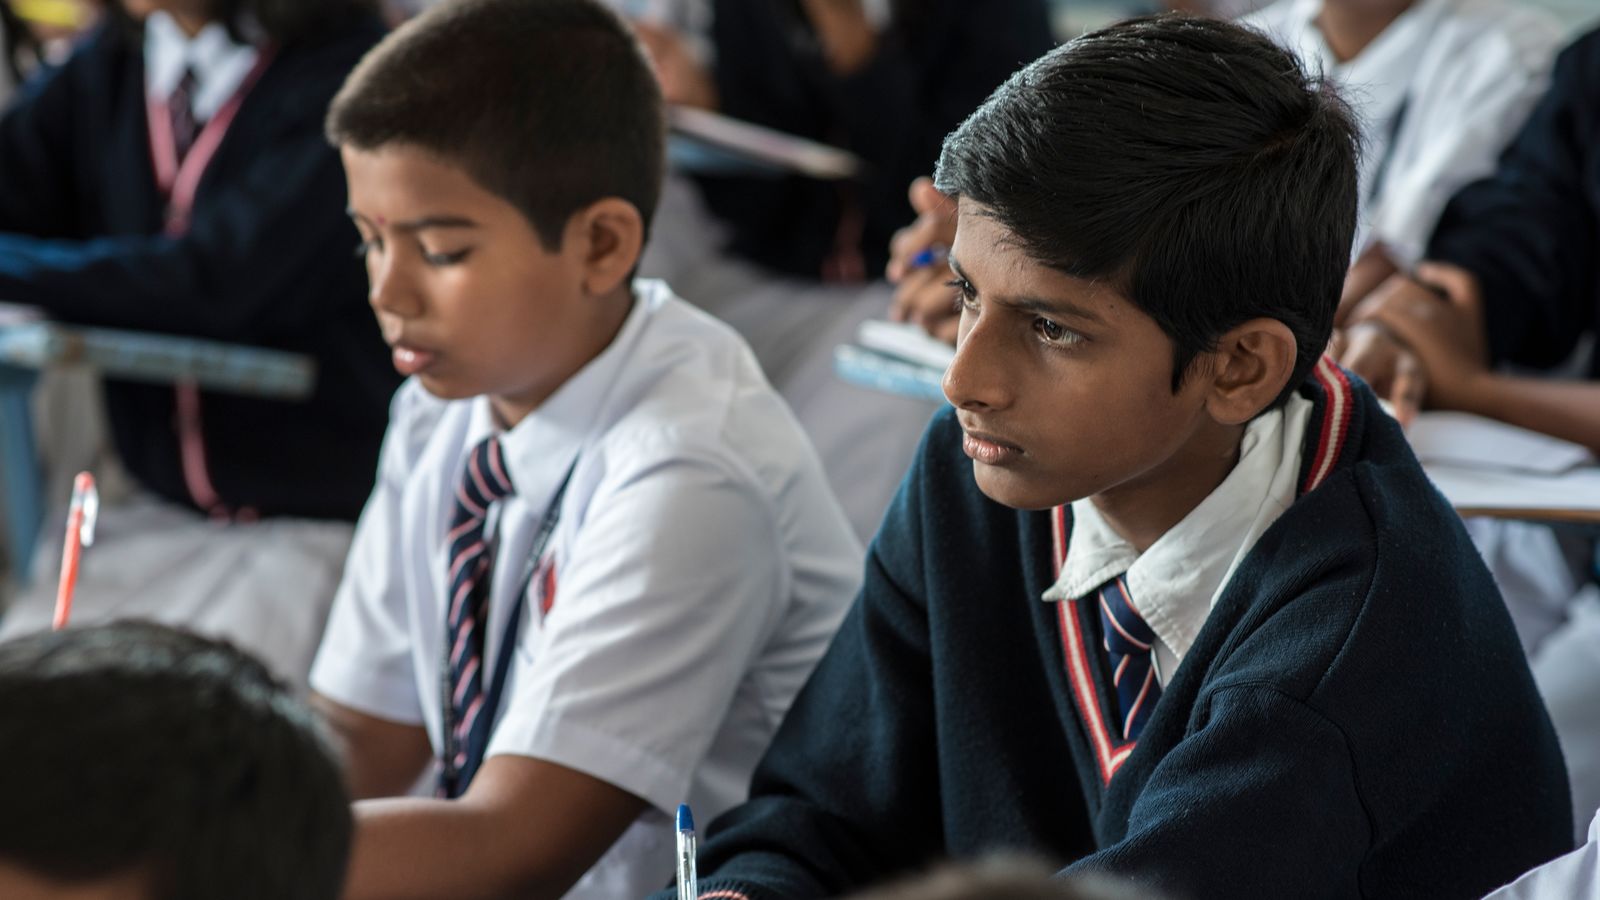 Indian students in the classroom benefit from impact investing